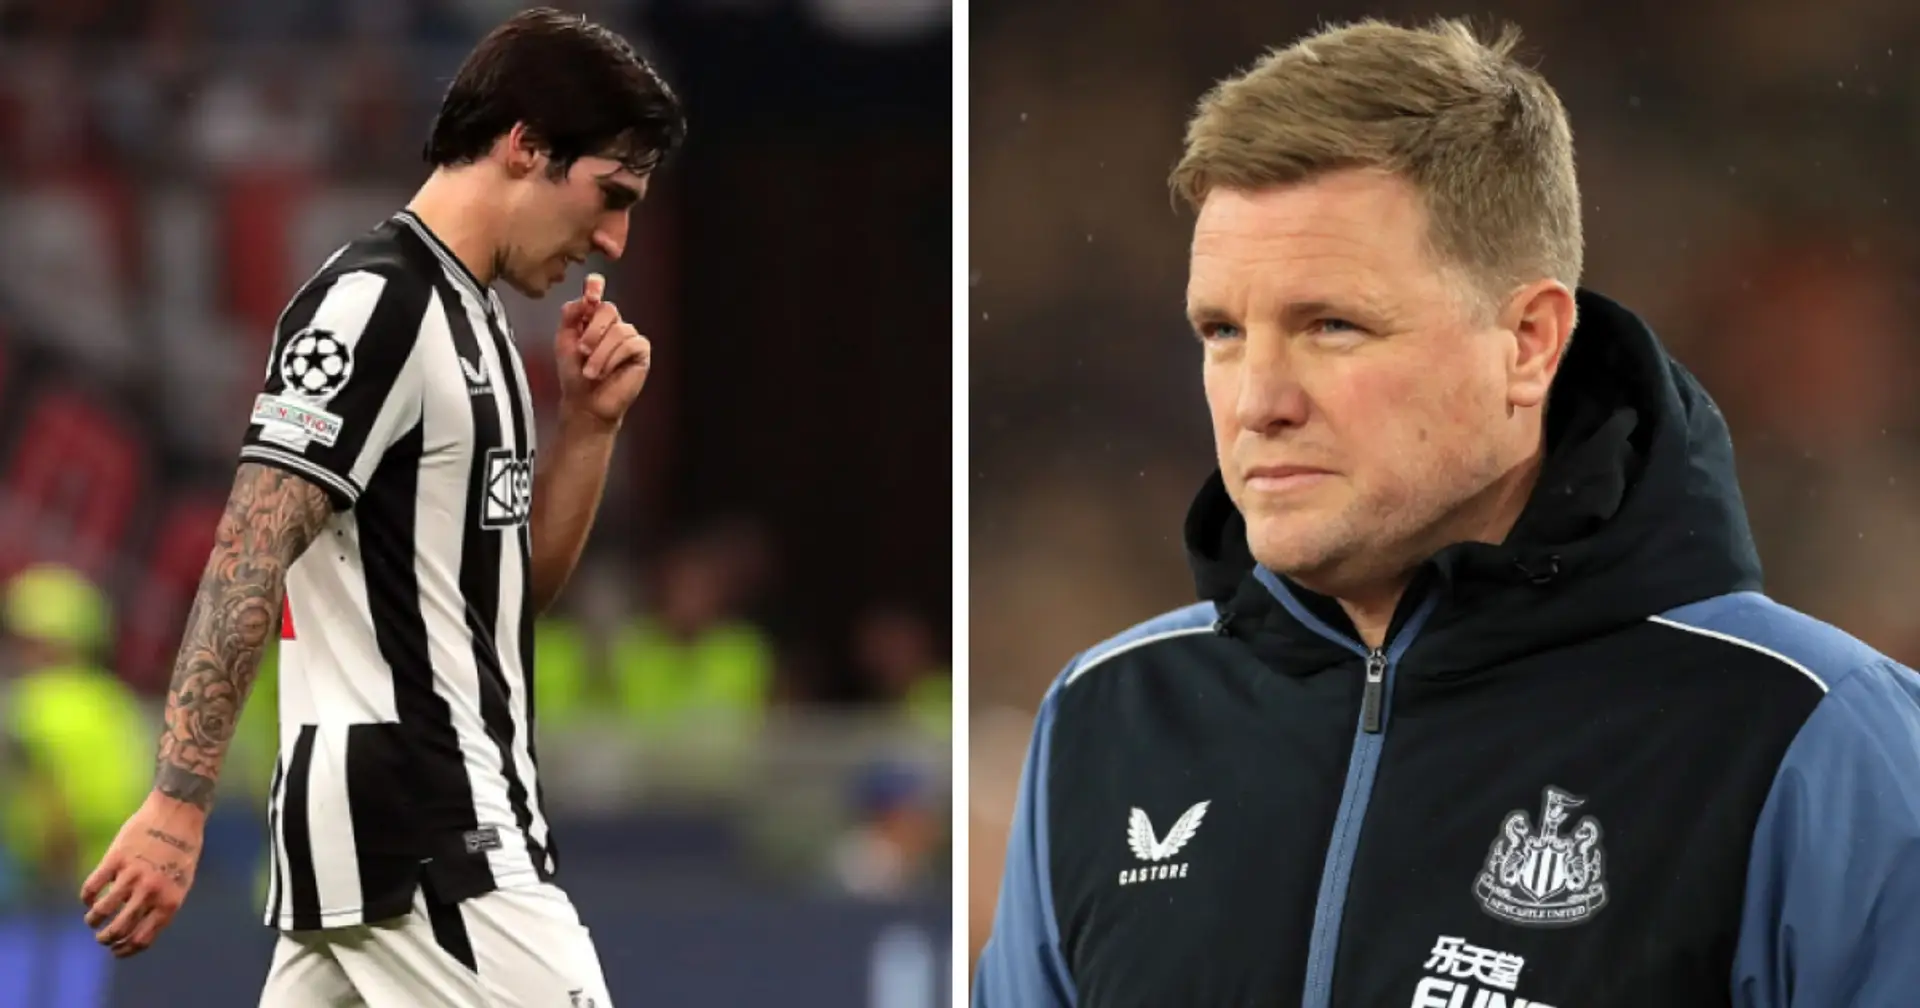 'I want Sandro to be himself': Eddie Howe on Sandro Tonali's difficult start at Newcastle